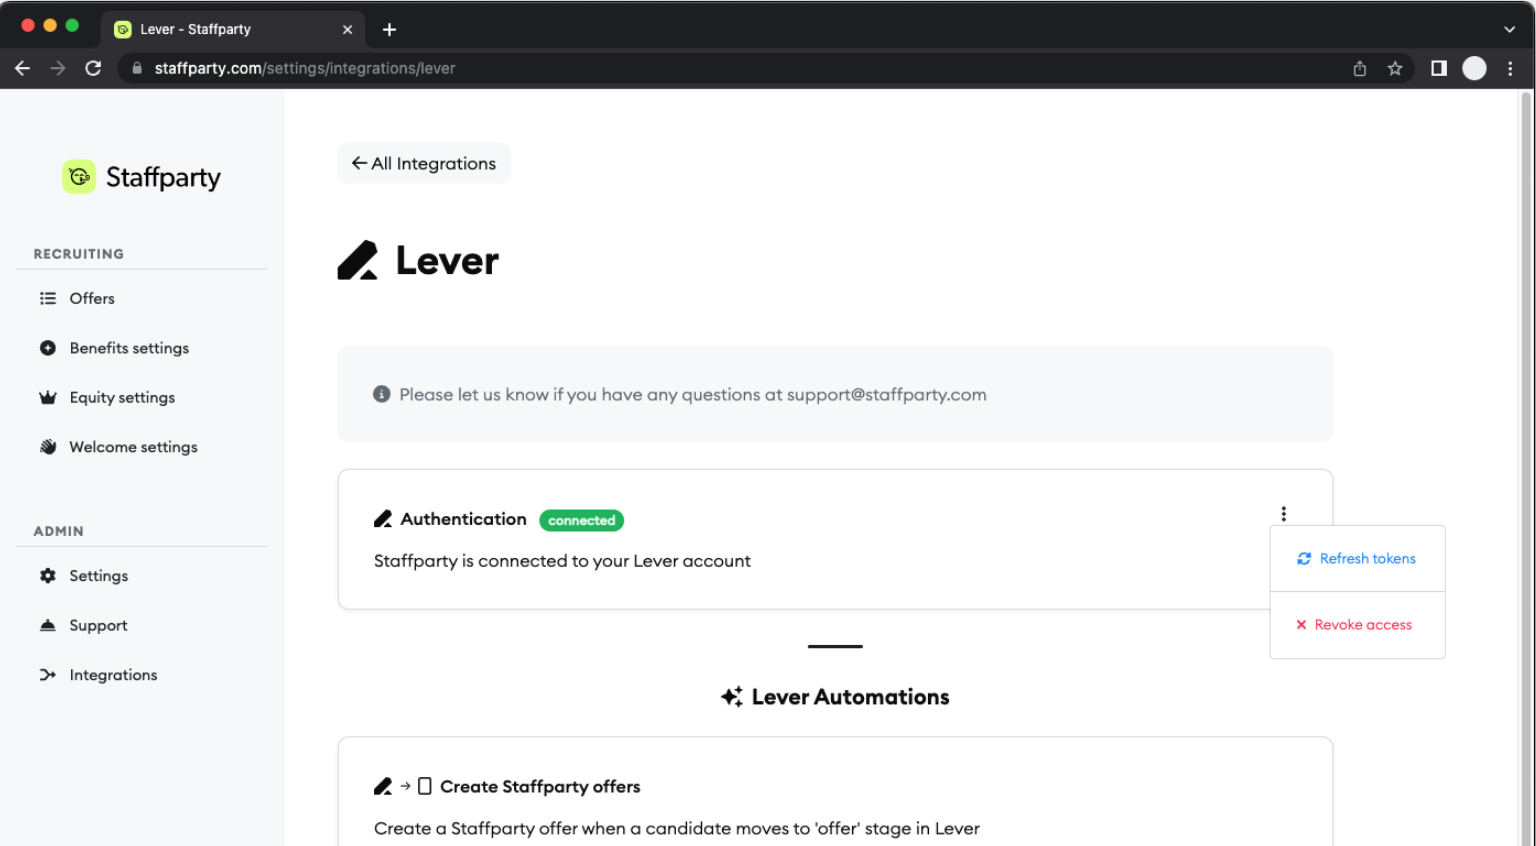 Staffparty integrations page showing Lever details with Refresh tokens and revoke access actions.